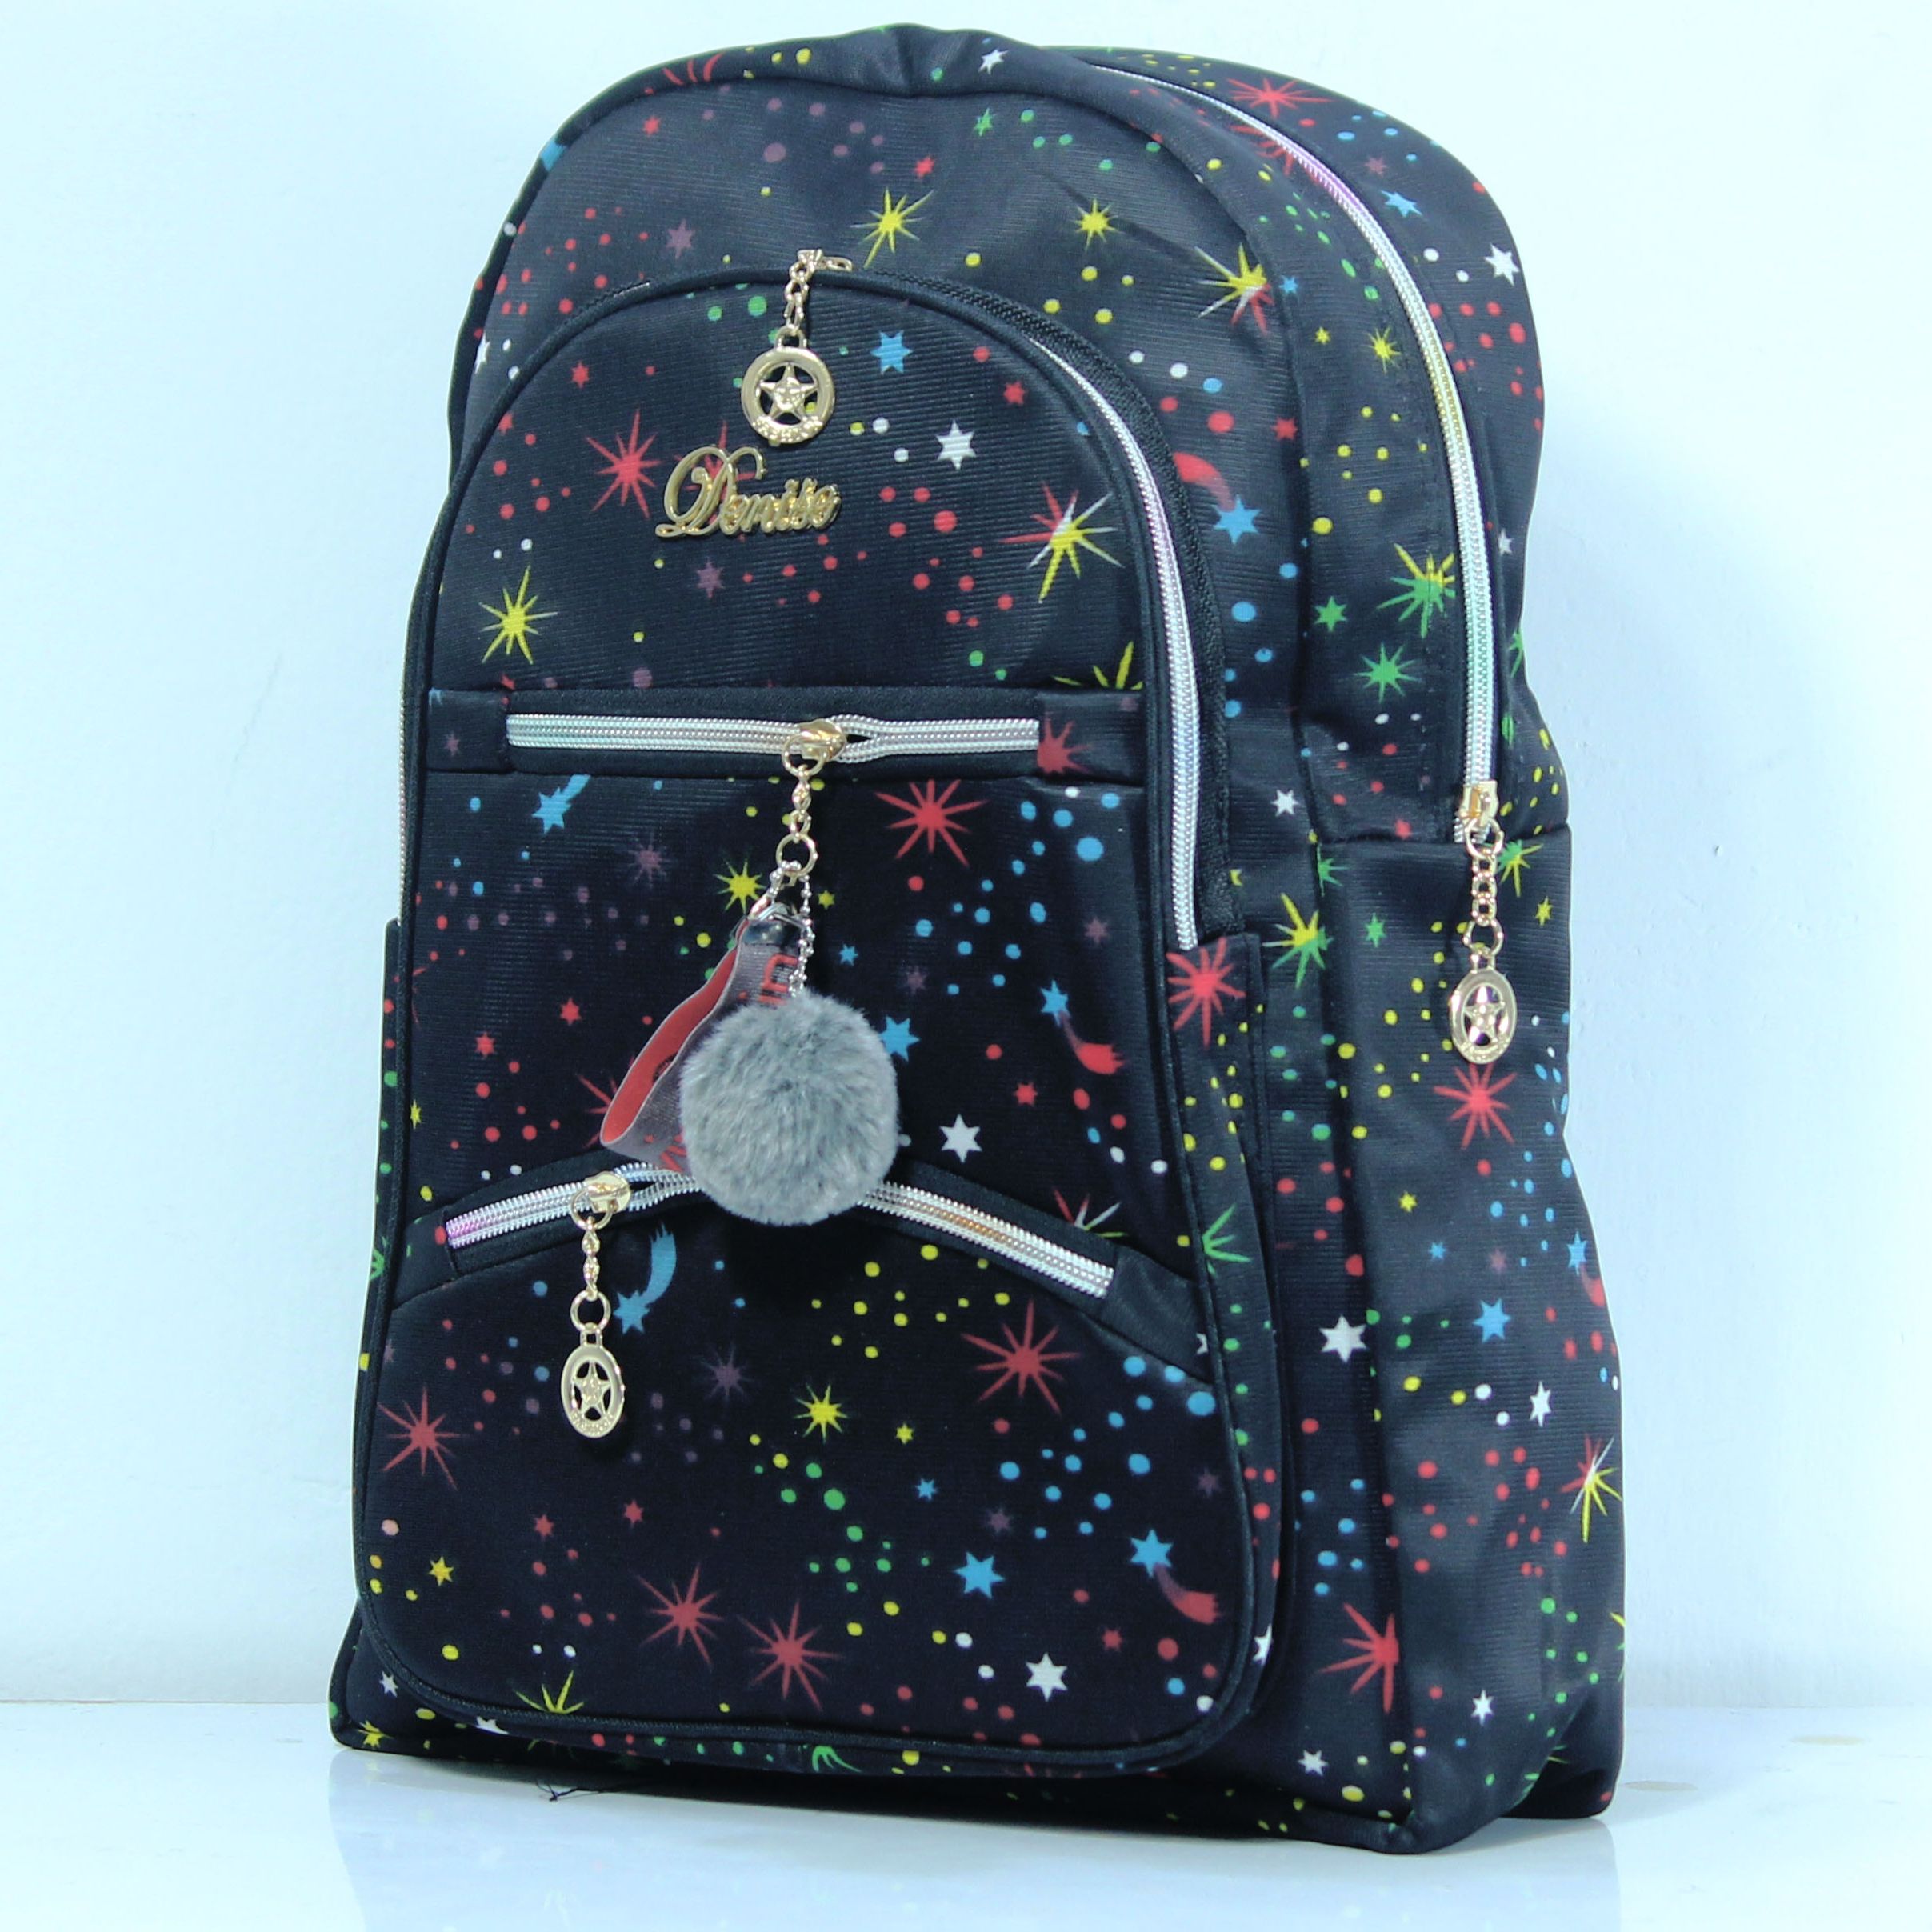 Colurfull China School Bag Use For Girls Waterproof And Washable